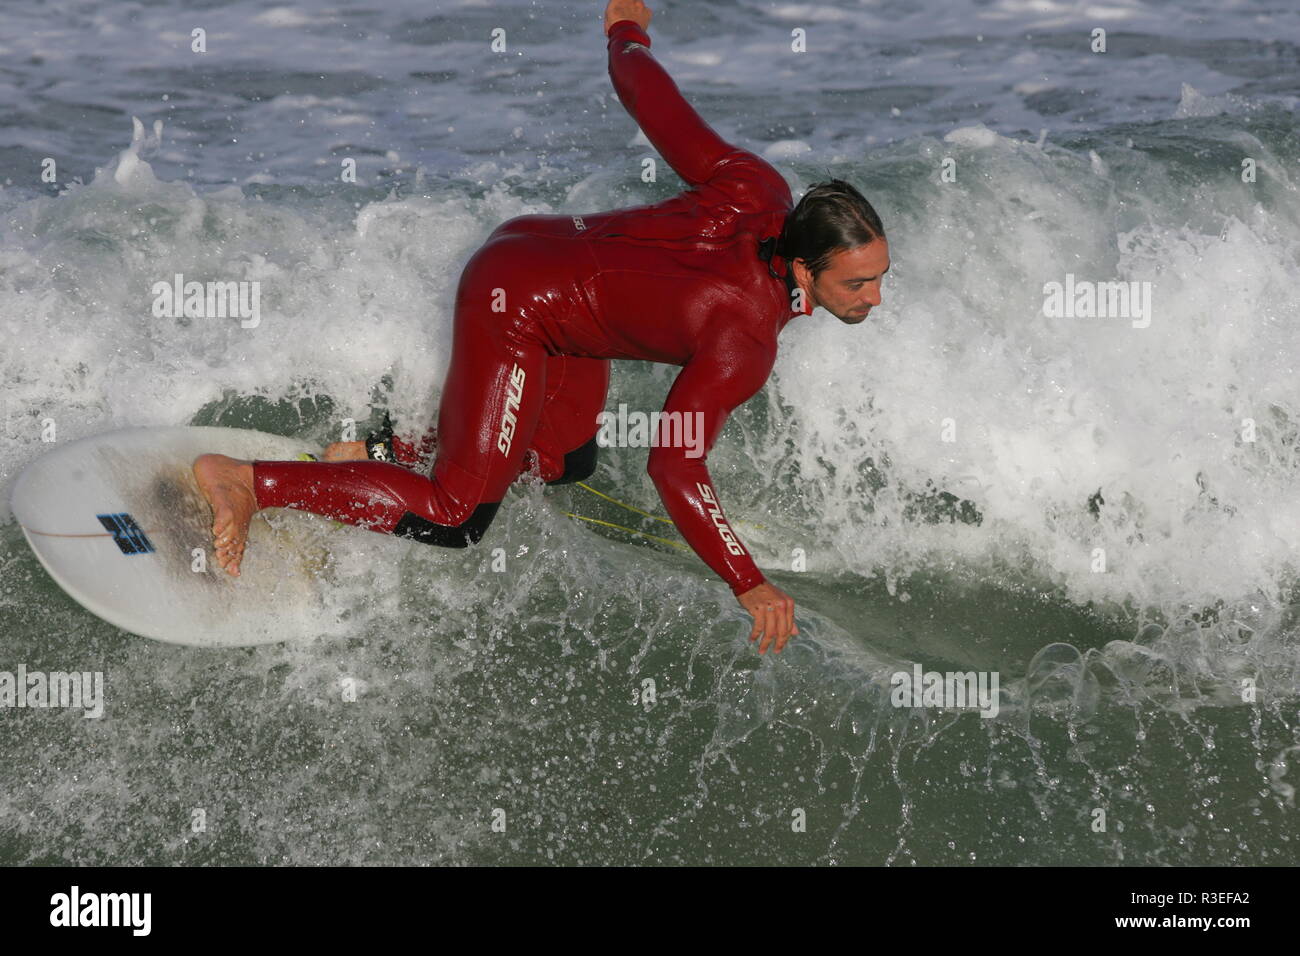 Surfing fun with red wetsuit Cornwall Stock Photo